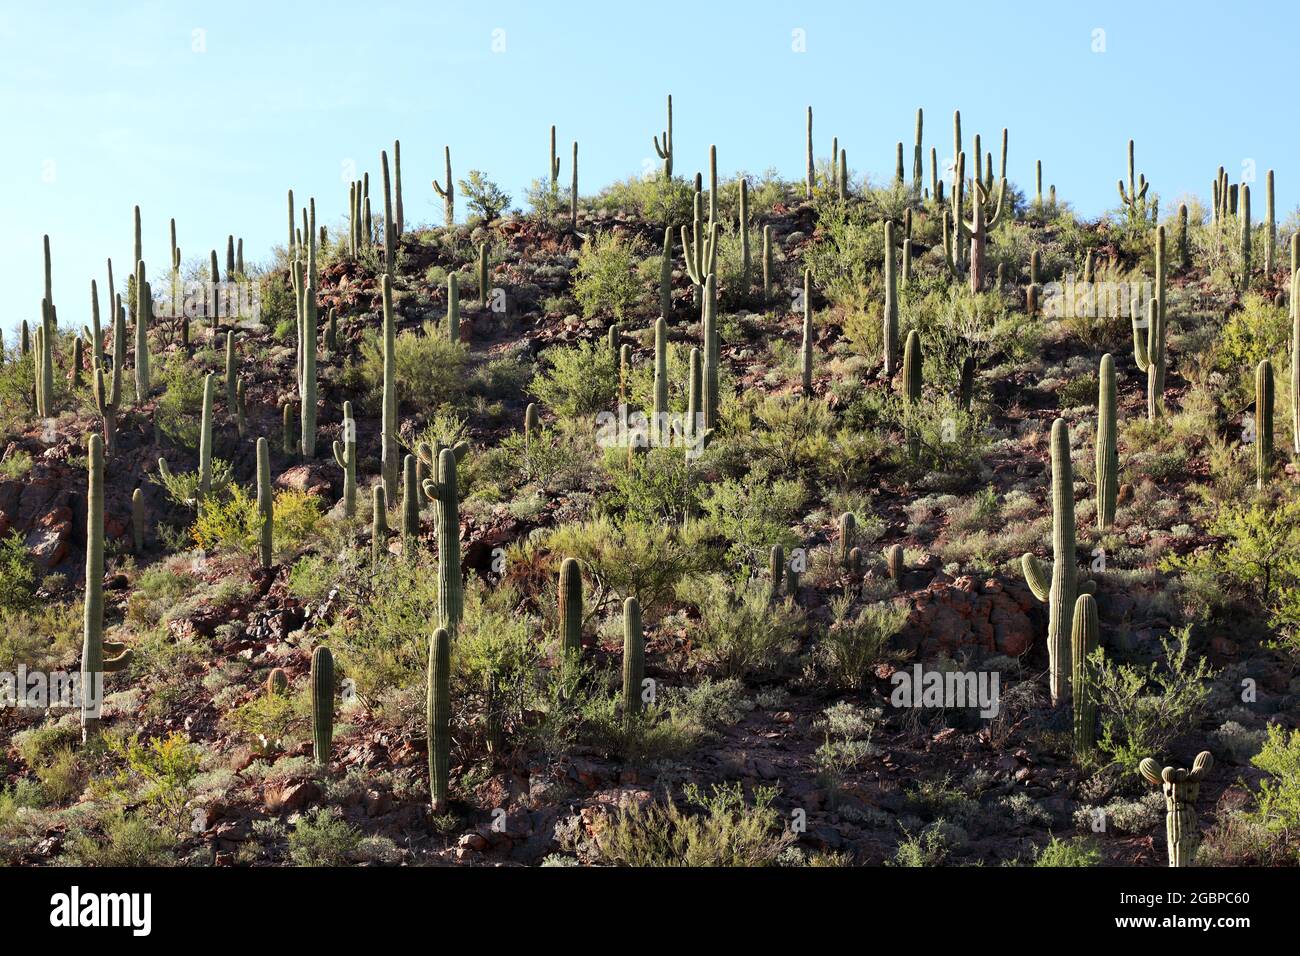 Ill Cactus High Resolution Stock Photography and Images   Alamy